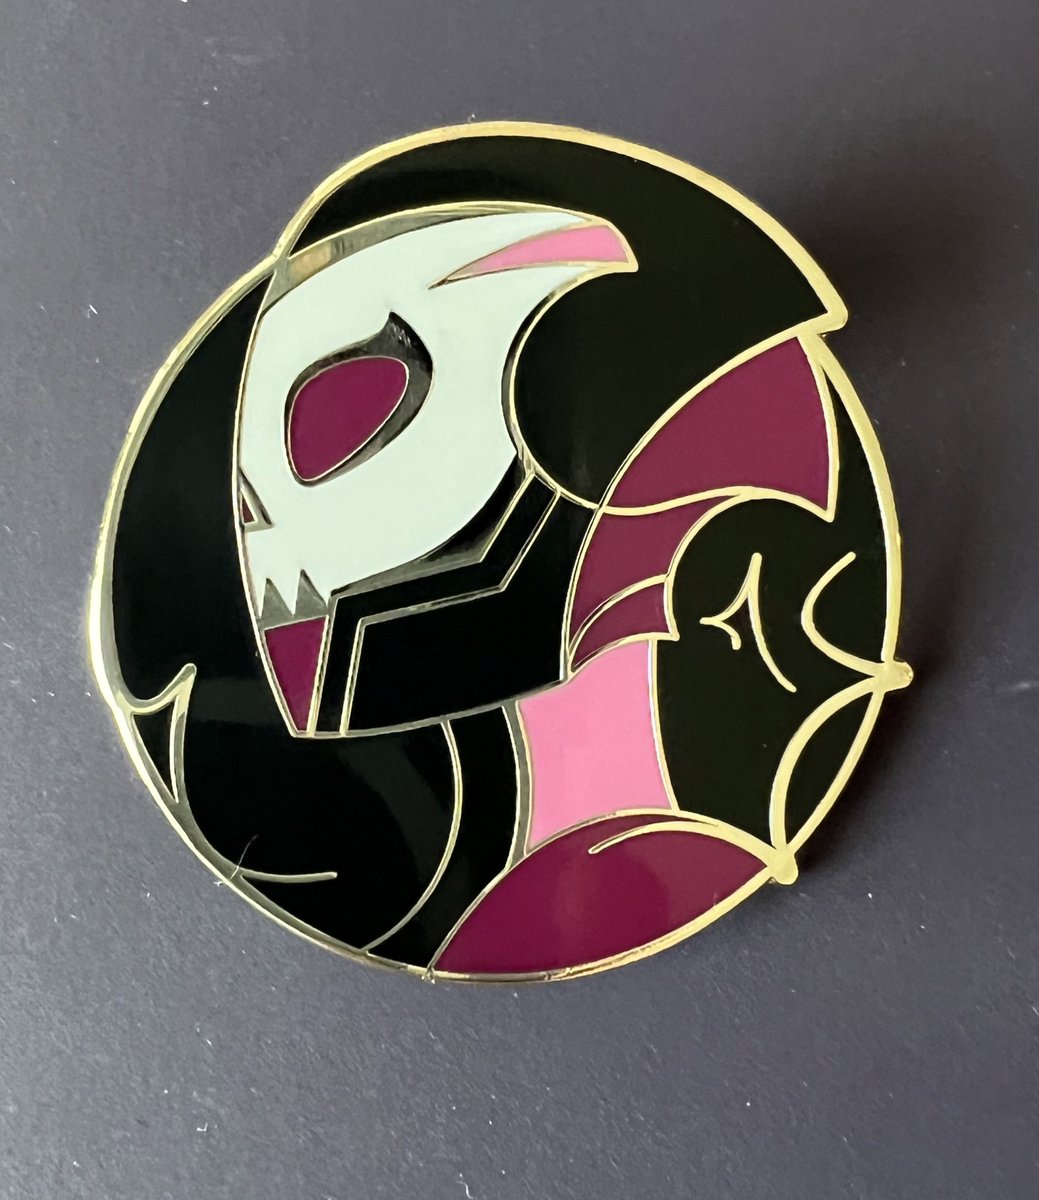 Want A Dead Lucky pin?? Find Melissa or myself on the floor after Noon today. We have a limited supply on hand daily for fans. Answer a Dead Lucky or Massive-verse question correct and it’s yours. Until we’re out! #massiveverse #deadlucky @misty_flores